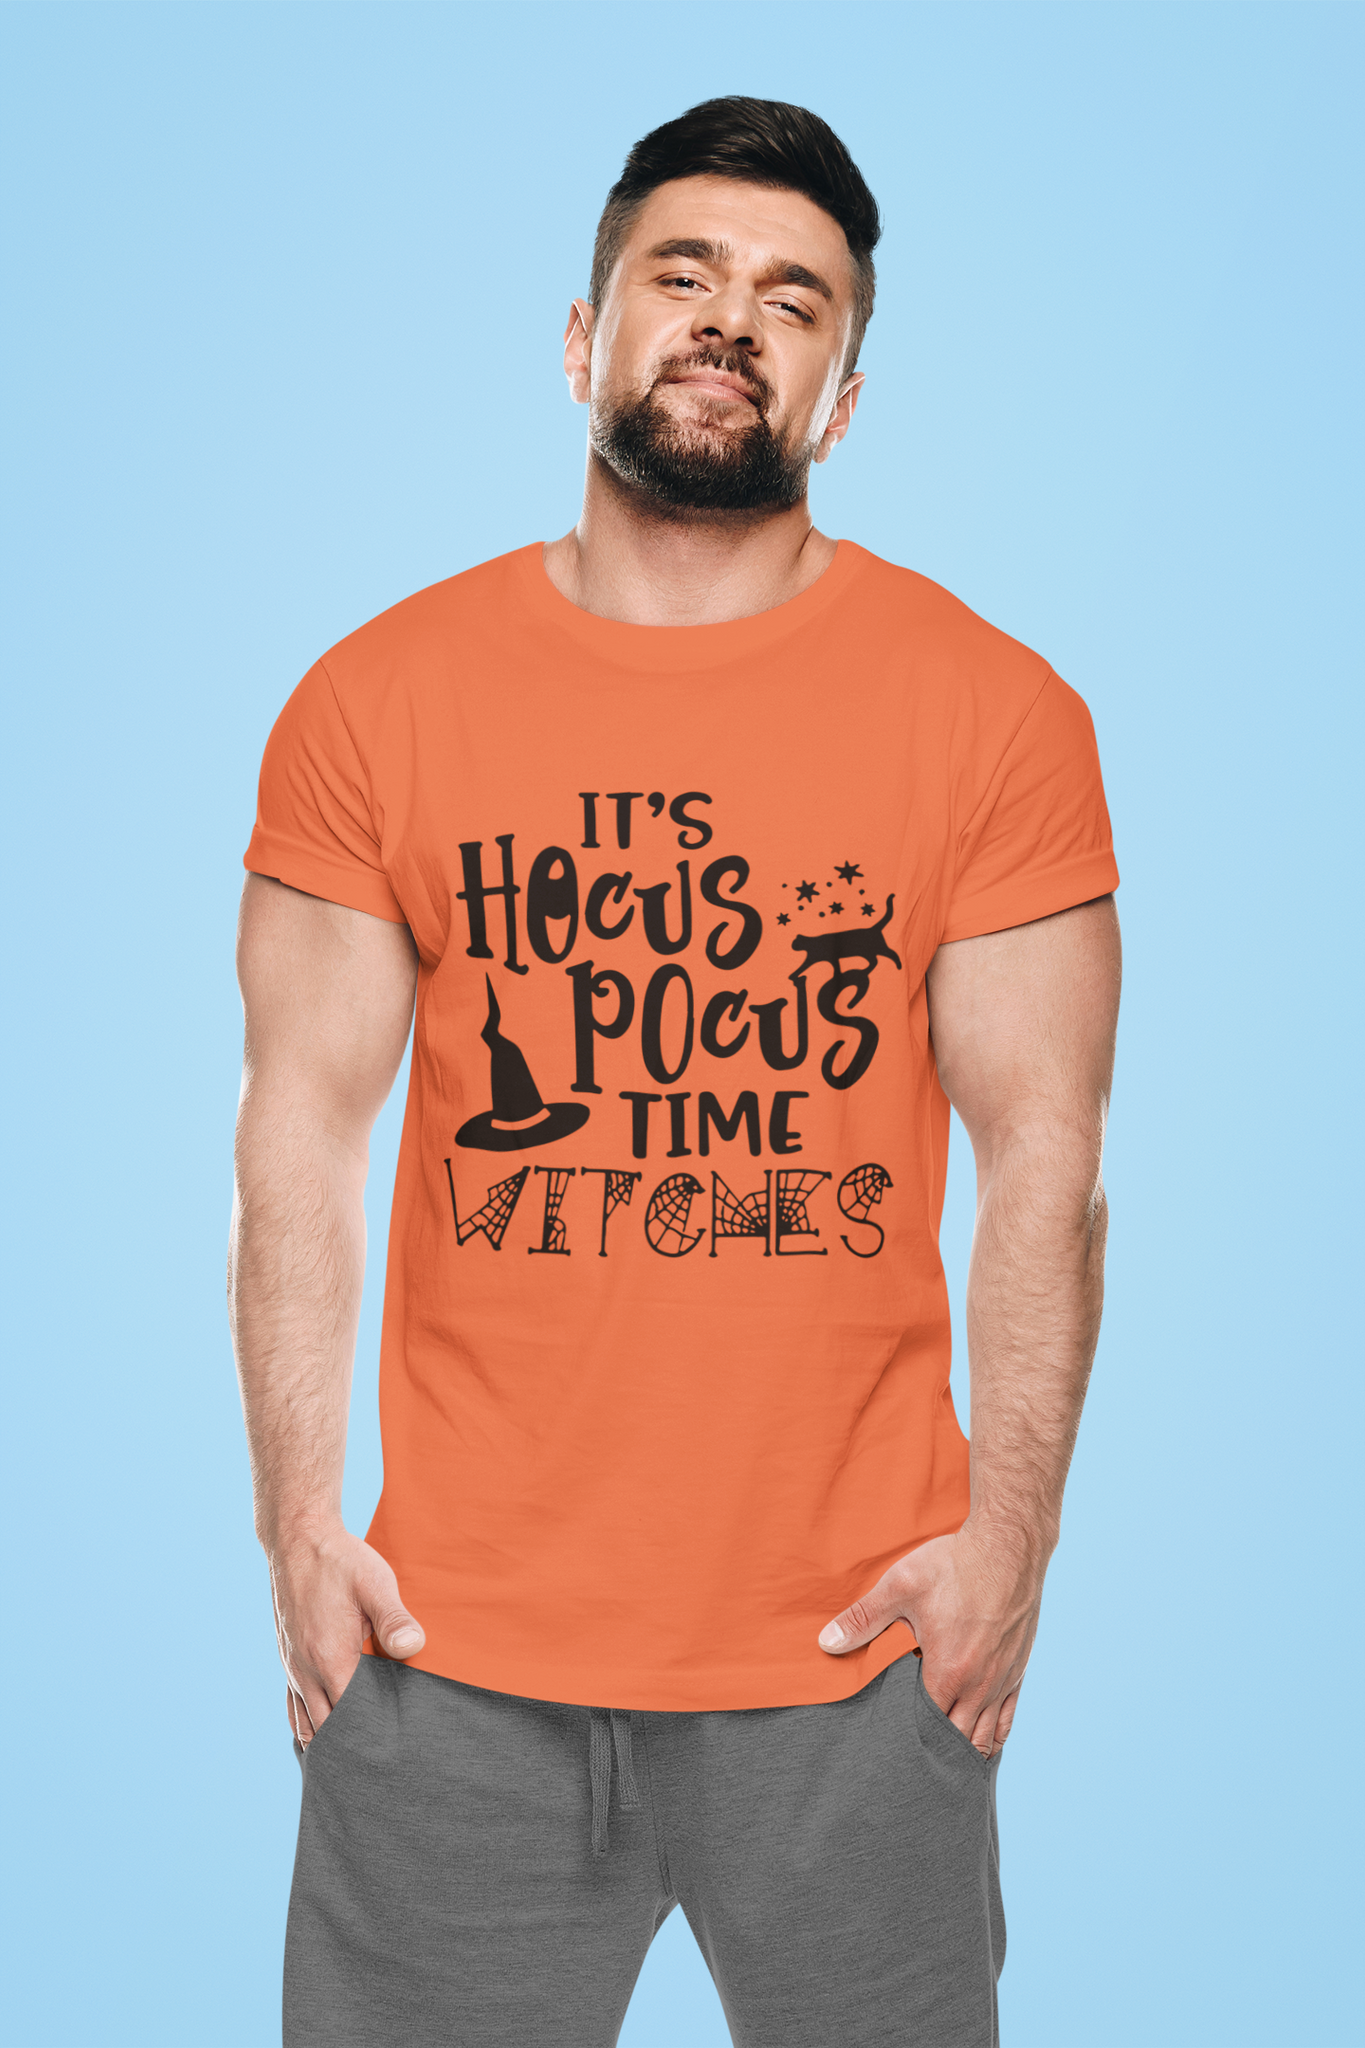 Hocus Pocus T Shirt, Its Hocus Pocua Time Witches Tshirt, Halloween Gifts